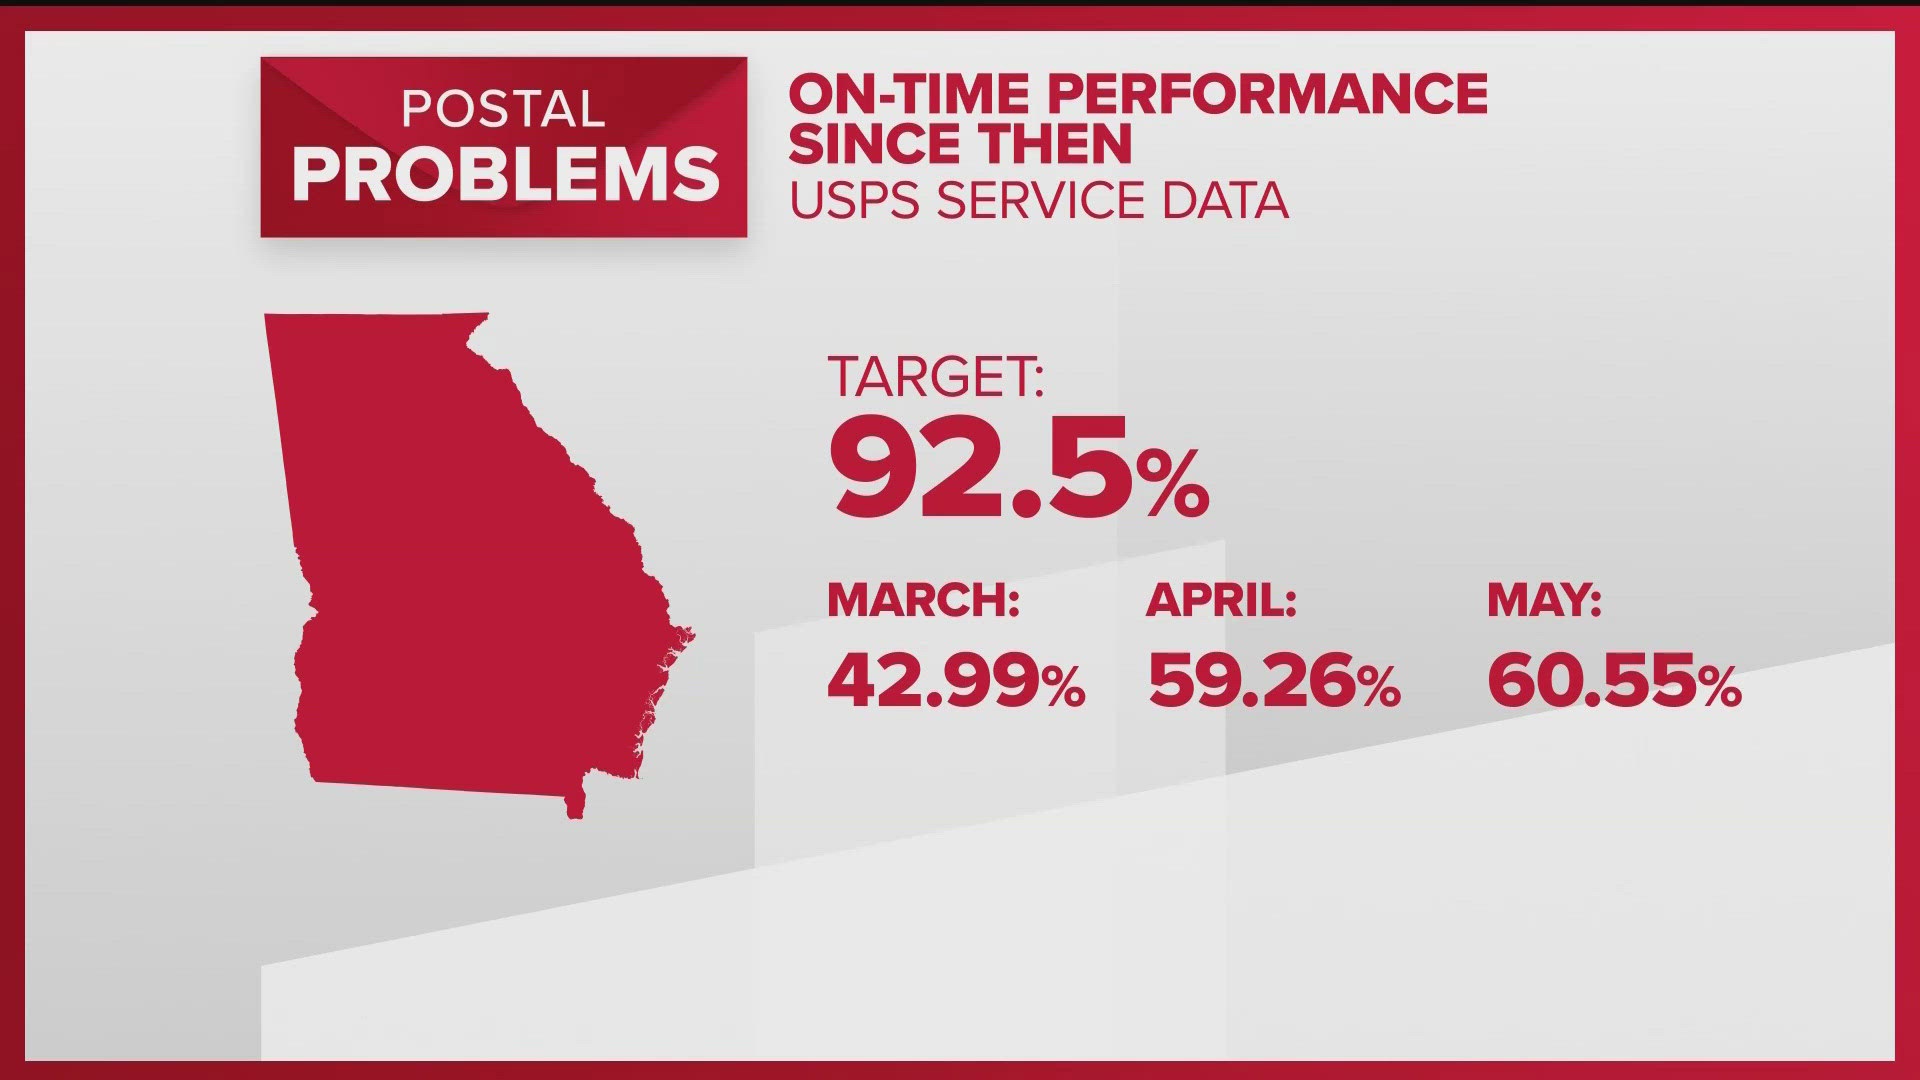 U.S. Senator Jon Ossoff toured the USPS Atlanta Regional Processing Facility in Palmetto on Thursday. Here's a look at USPS' on-time performance data.